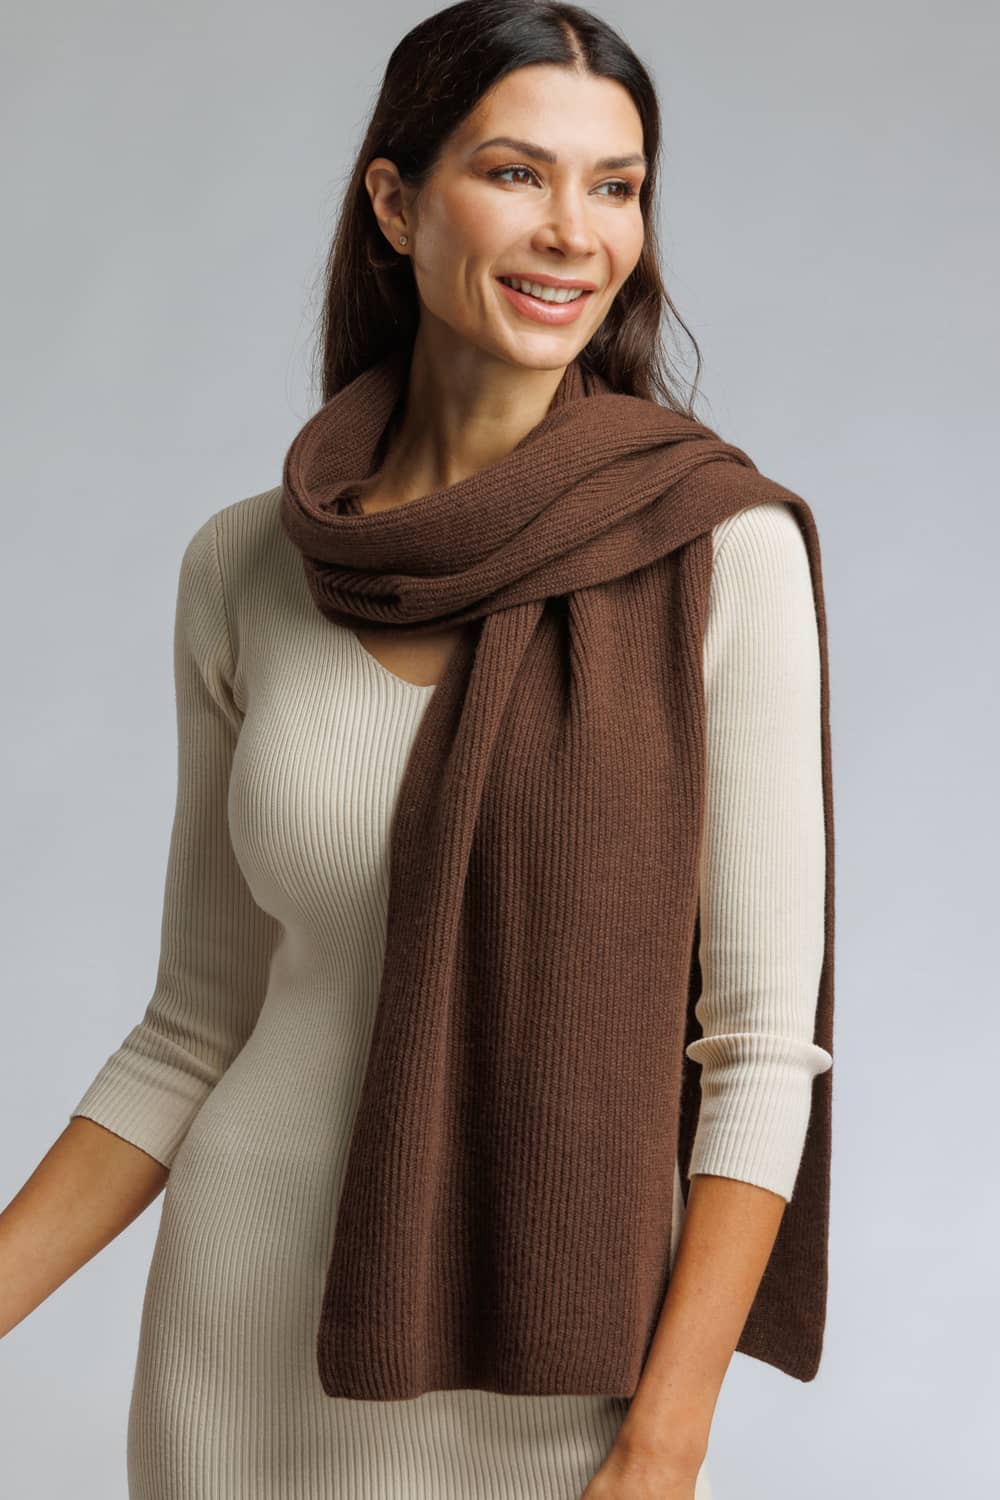 Find The Perfect 100% Cashmere Scarf